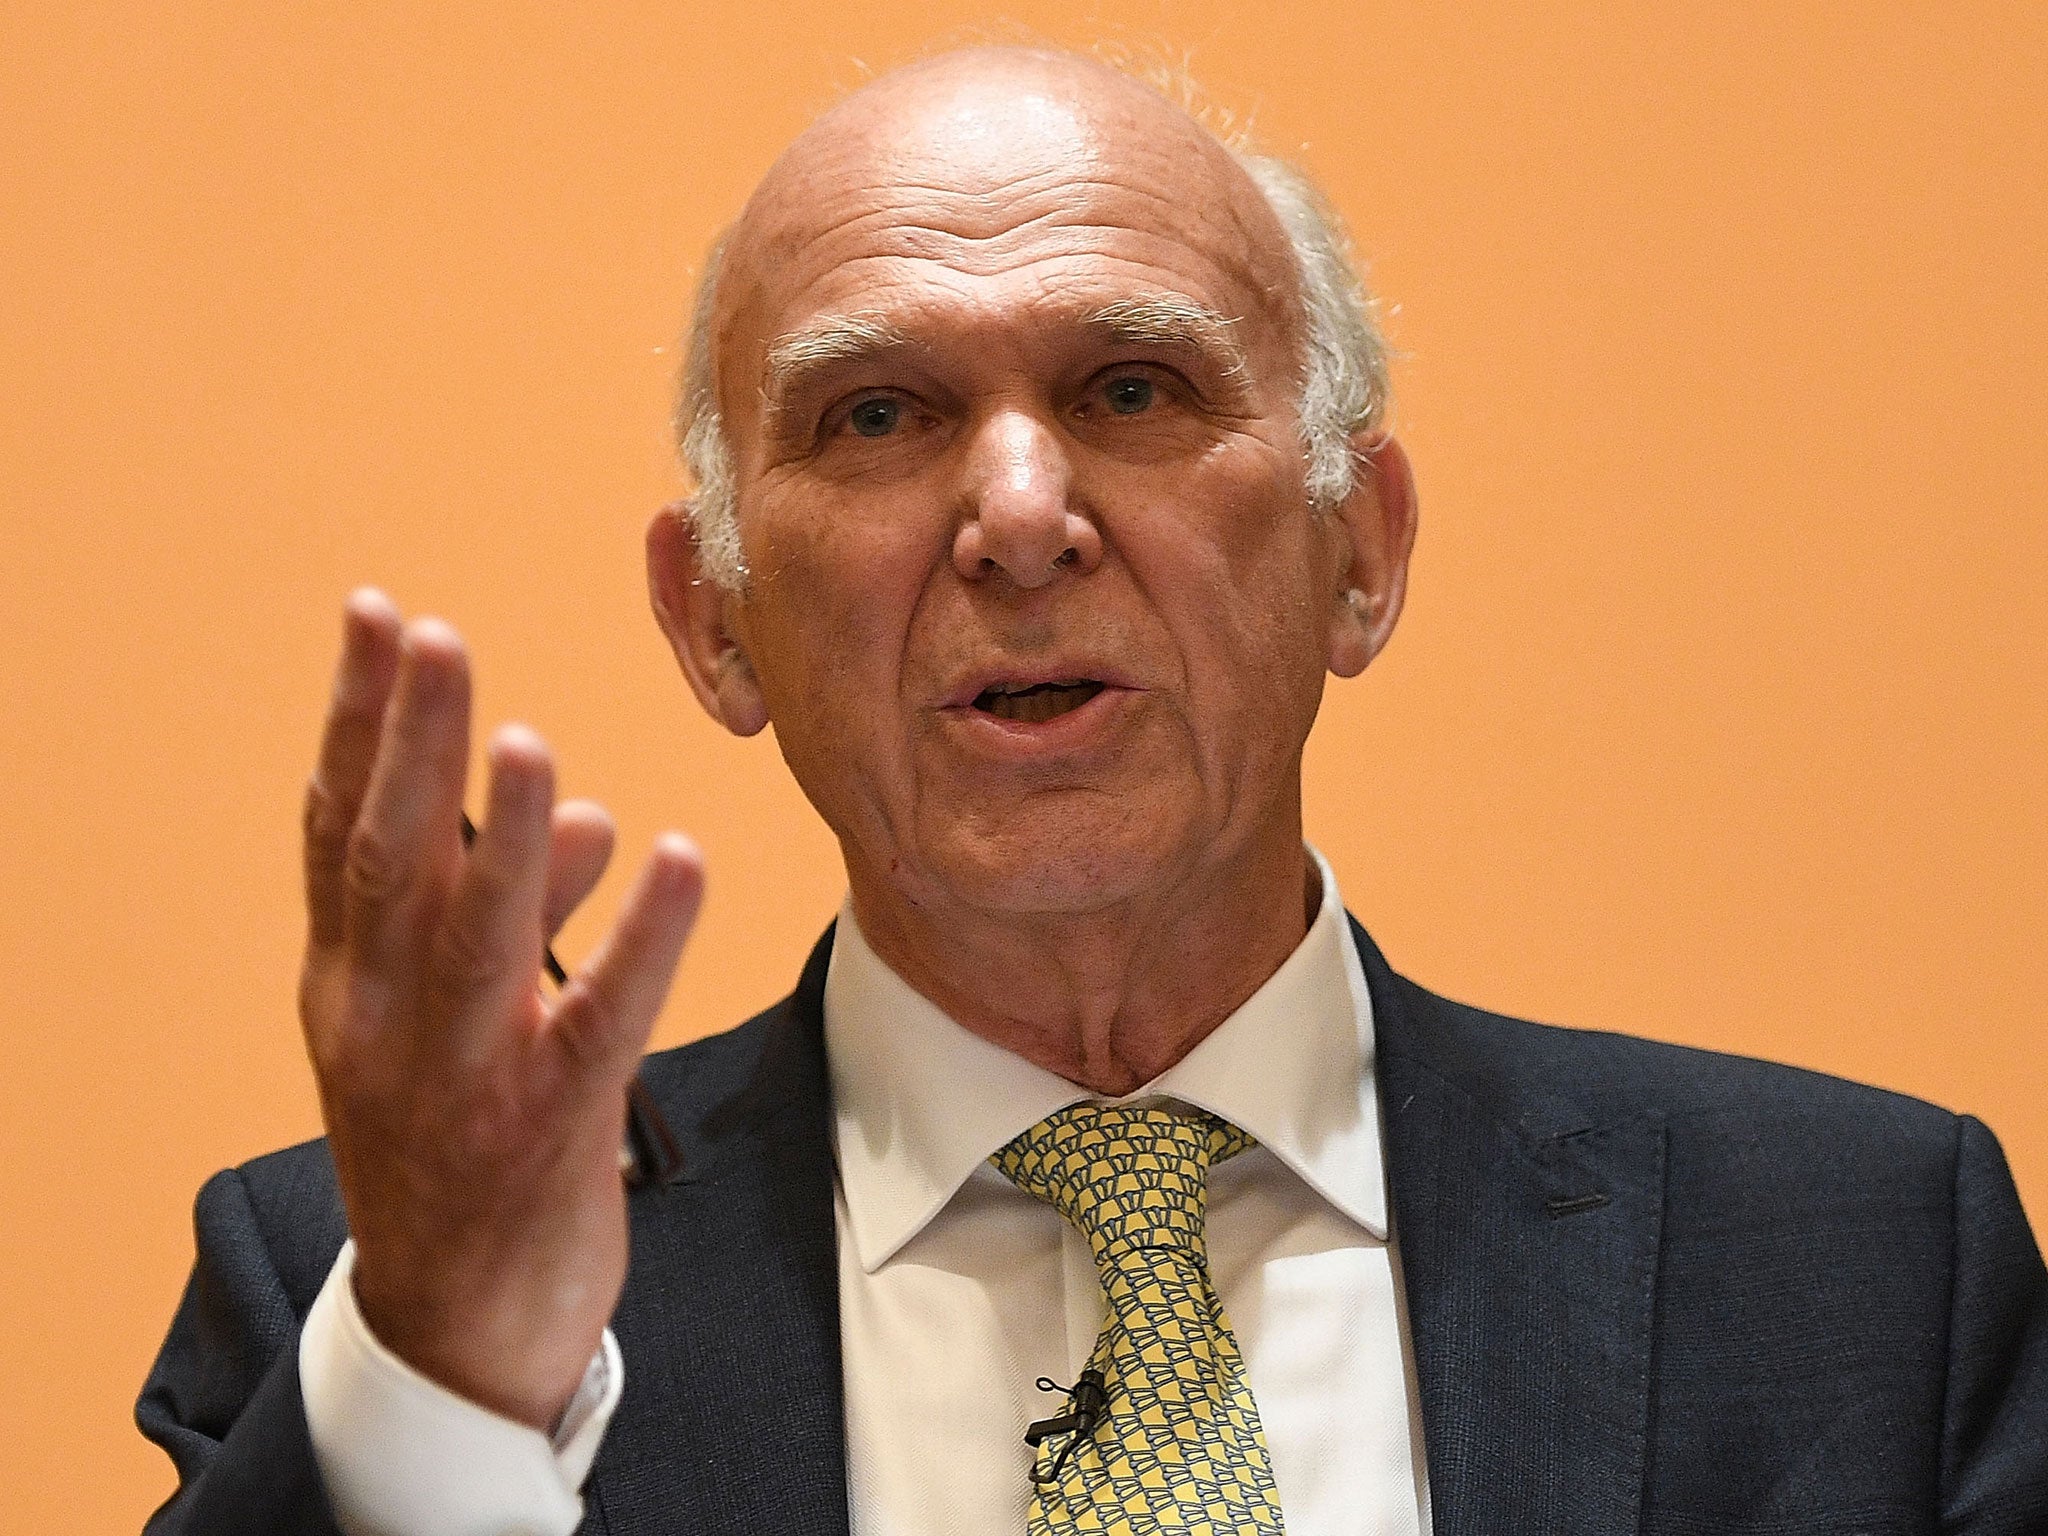 The Liberal Democrats have announced Vince Cable as their new party leader